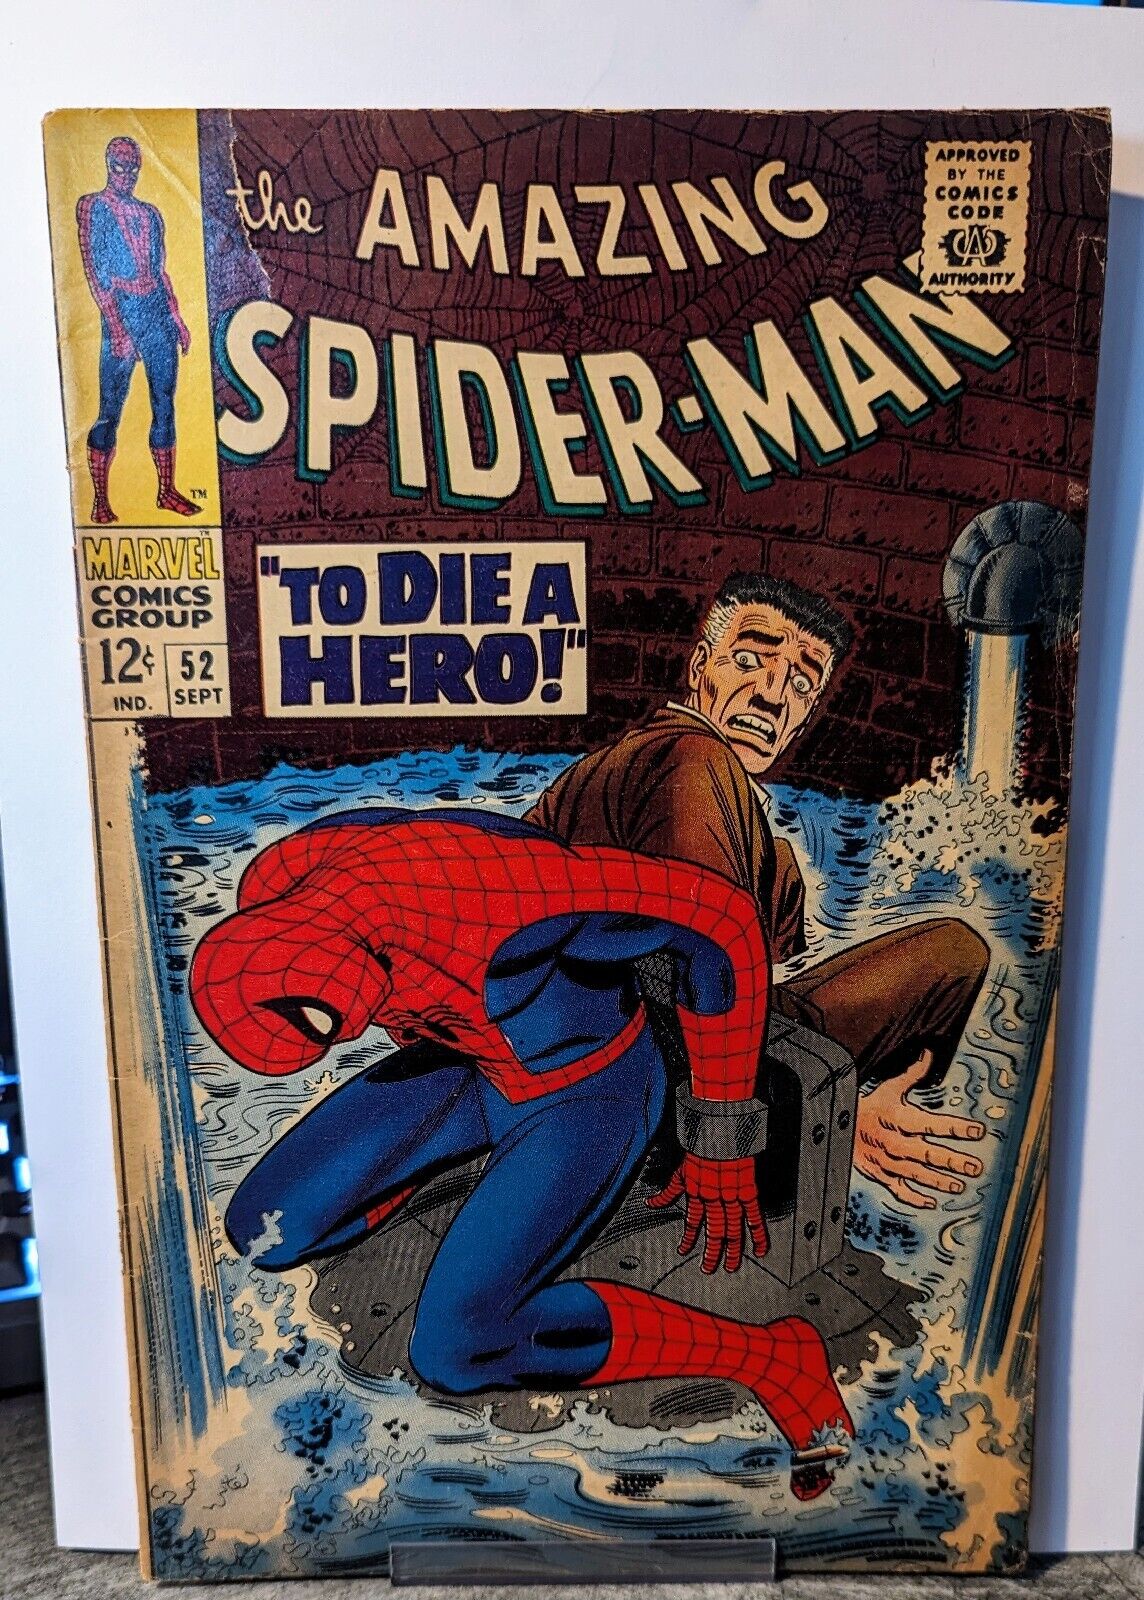 The Amazing Spider-Man, Vol. 1 #52A